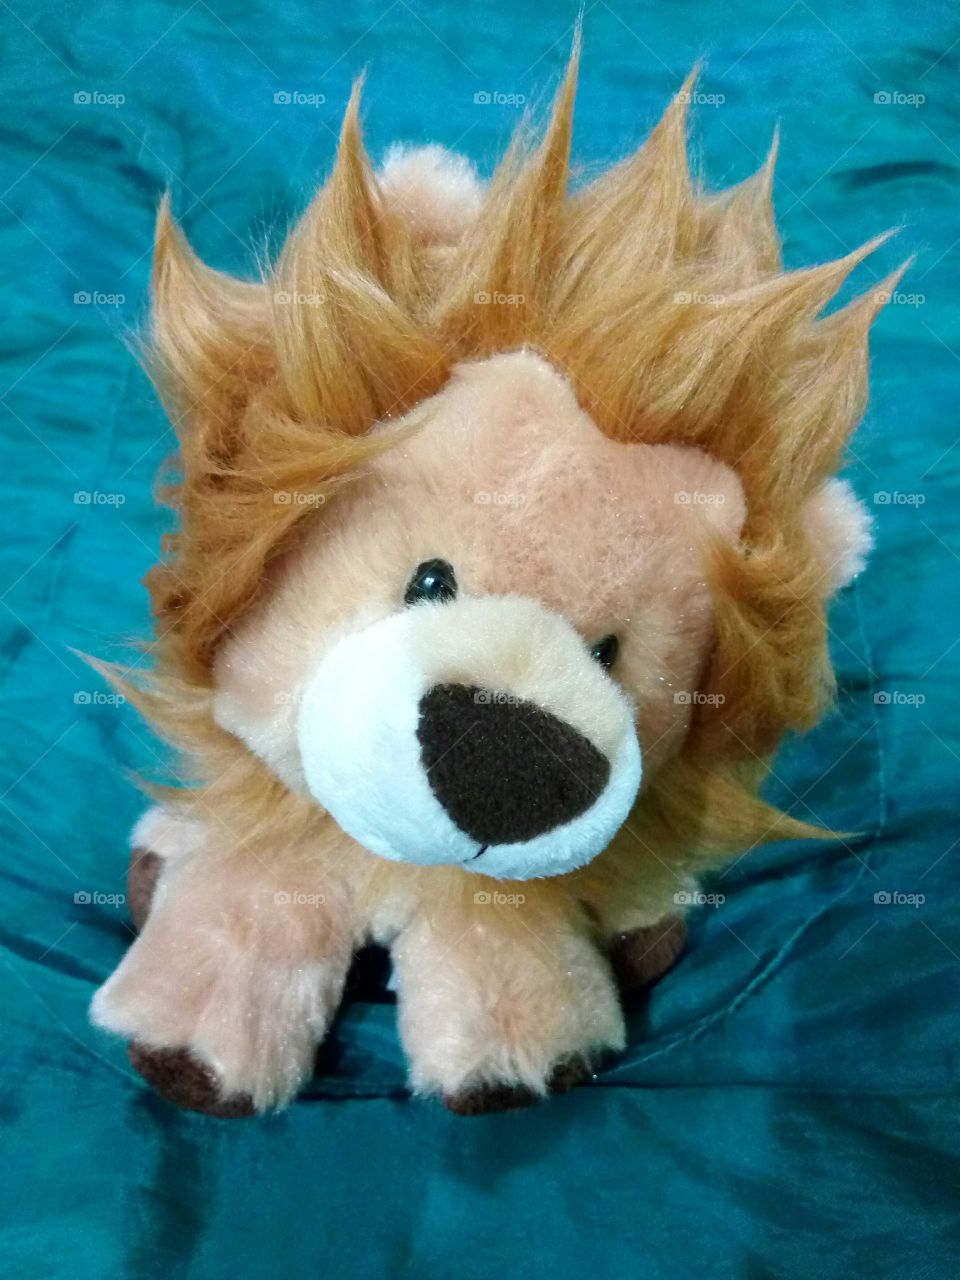 Lion or lion cub?
What can you do with the 'hair'?